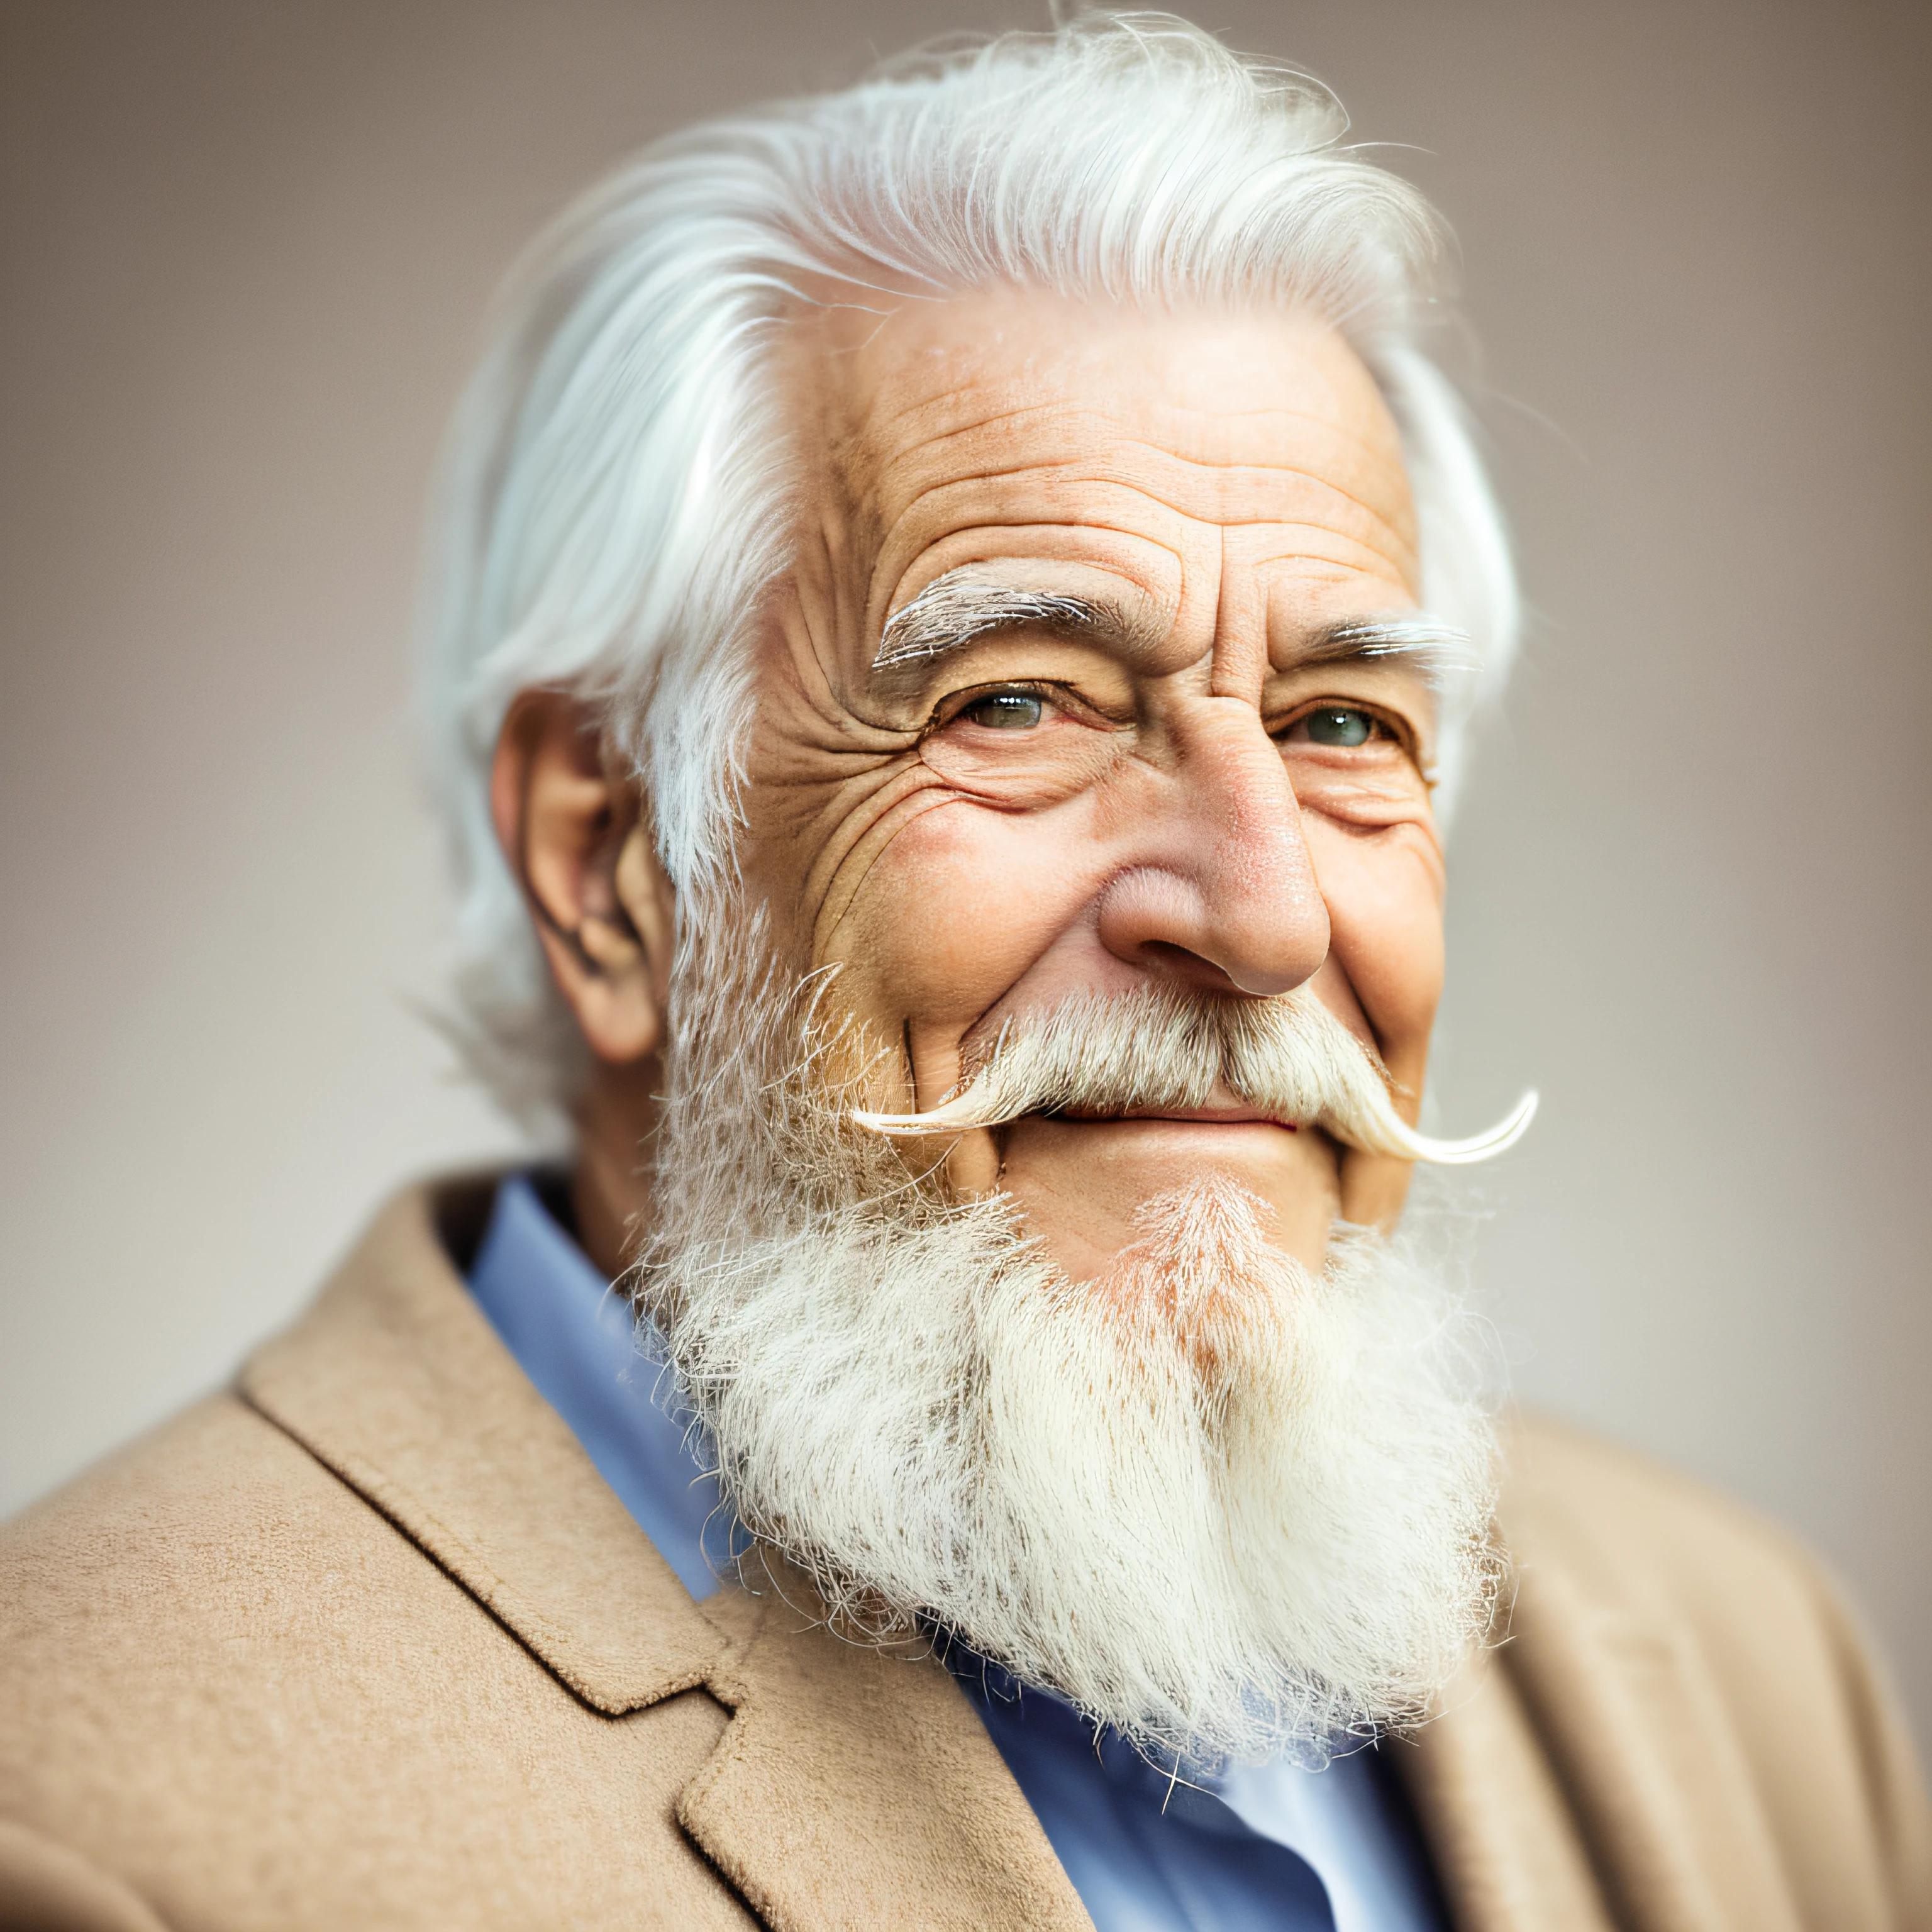 an elder with a beard and white hair, Grinning, look producing, portraite, close to the face